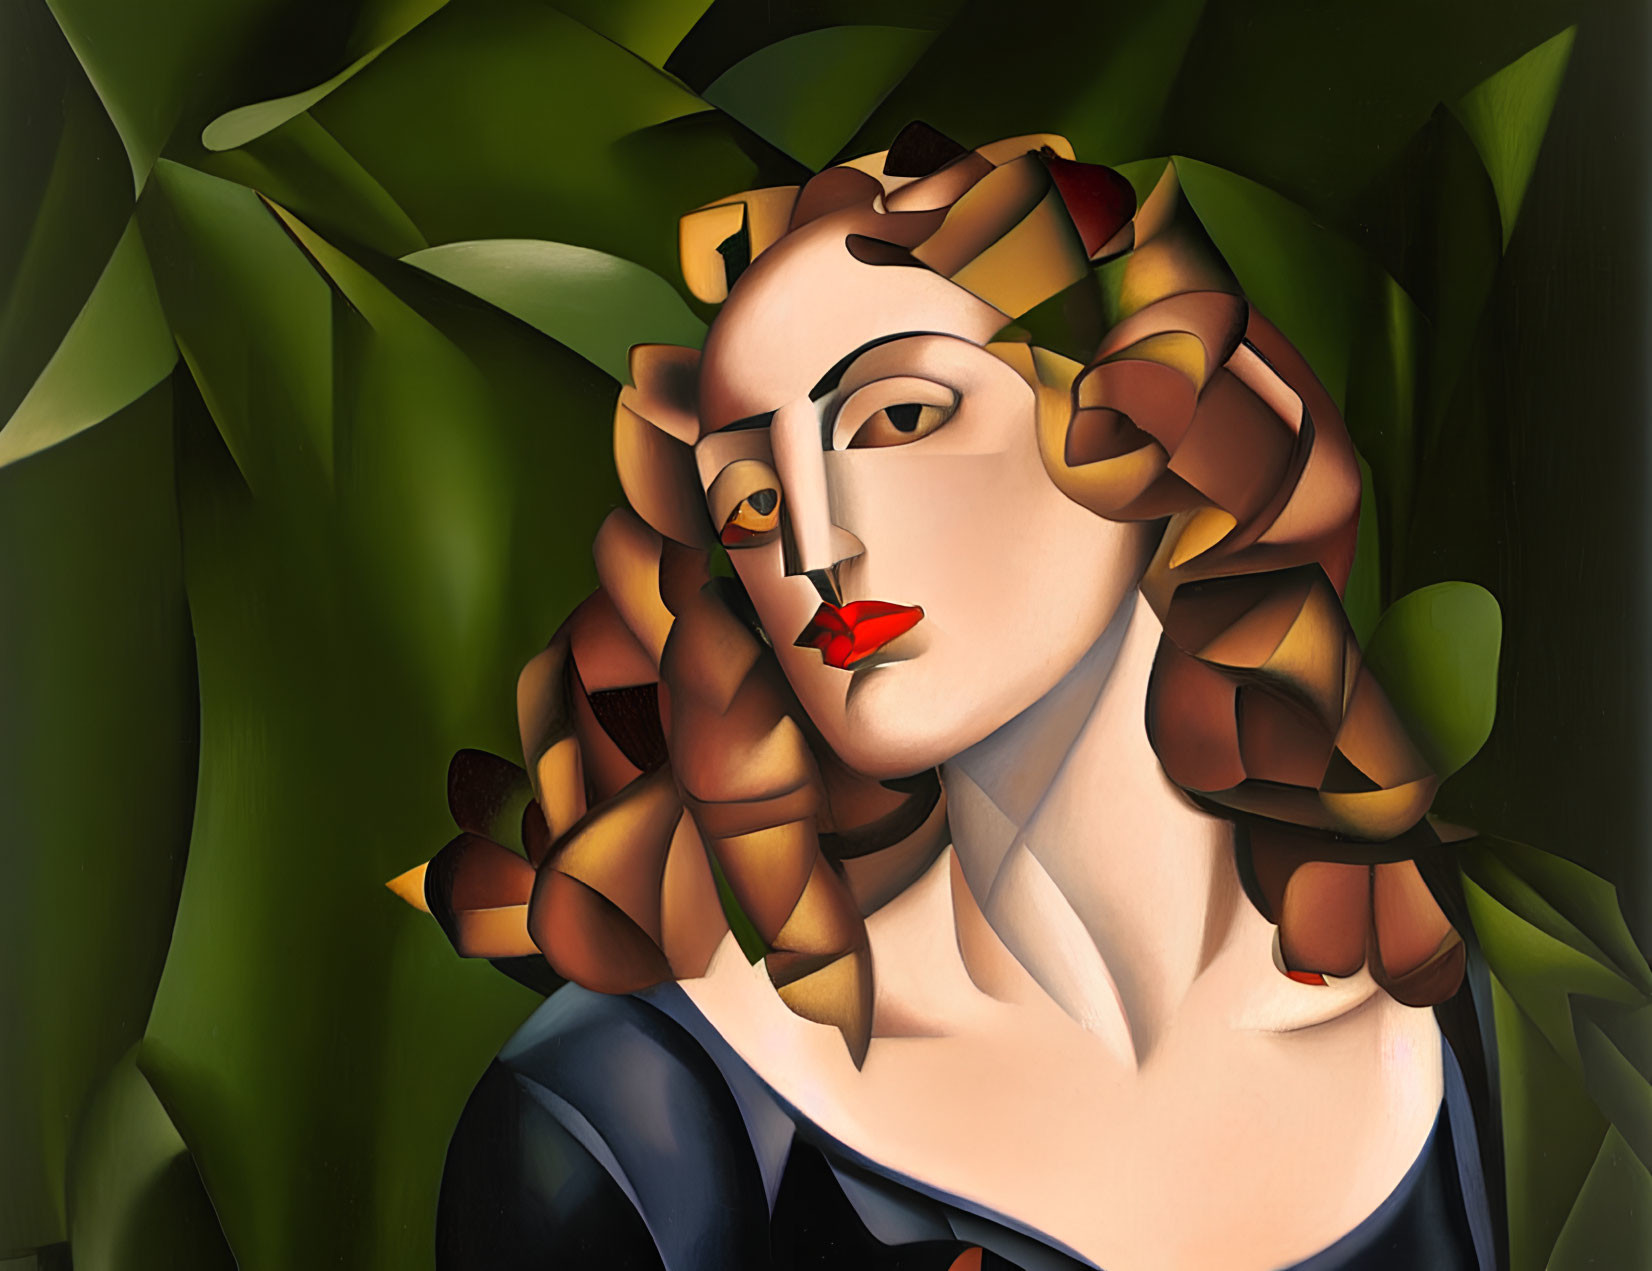 Stylized portrait of woman with leaf-shaped hair and red lips in green foliage.